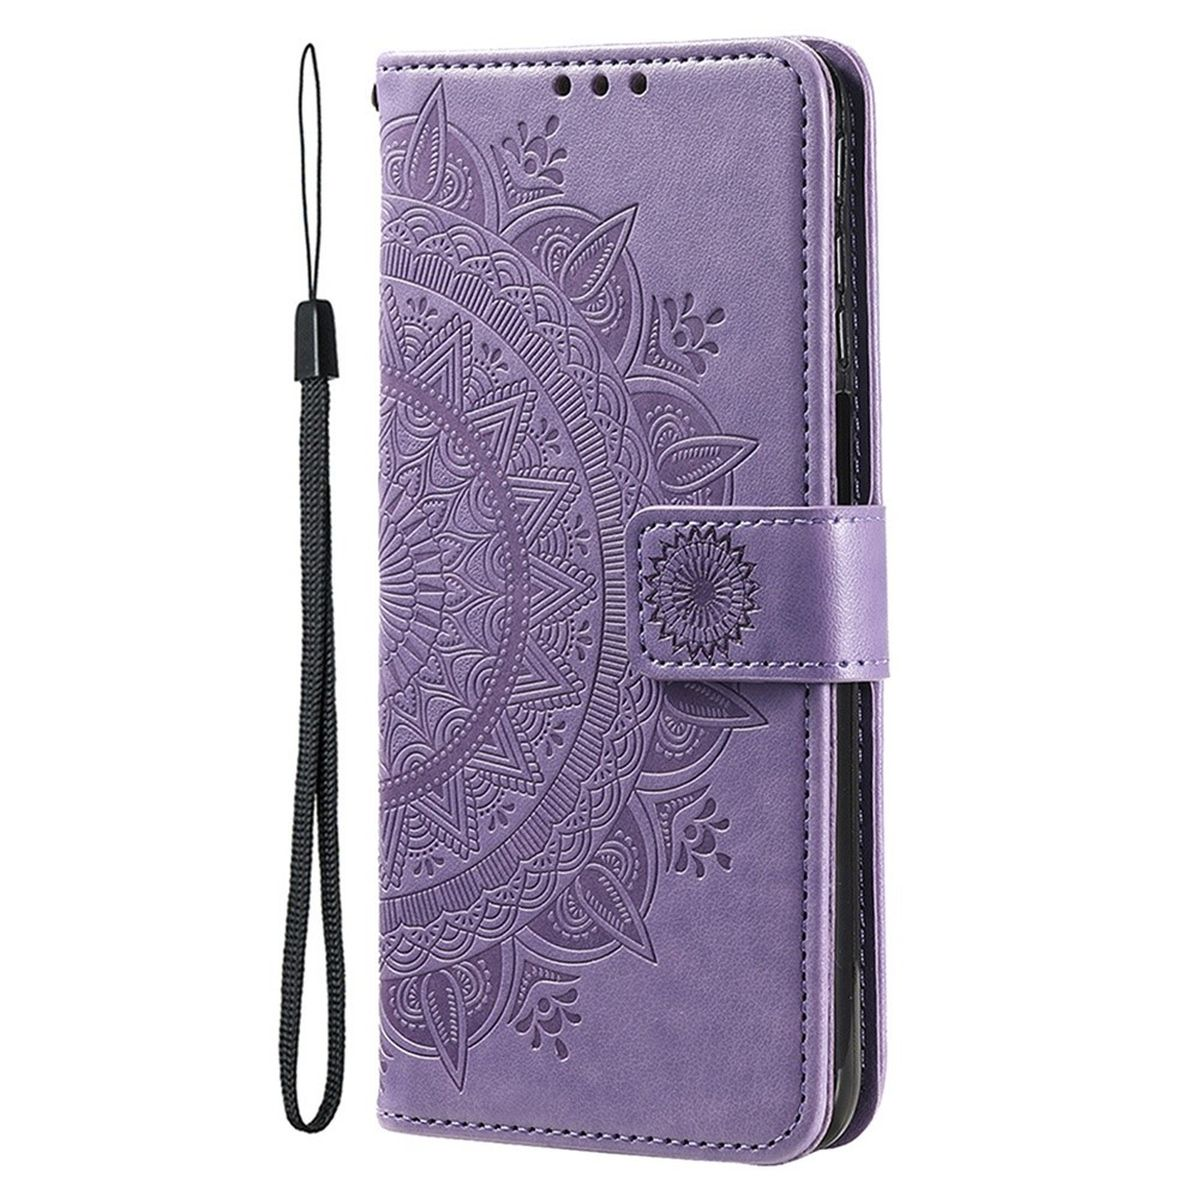 Mandala Max, Apple, COVERKINGZ Pro Bookcover, Klapphülle Lila 14 iPhone mit Muster,